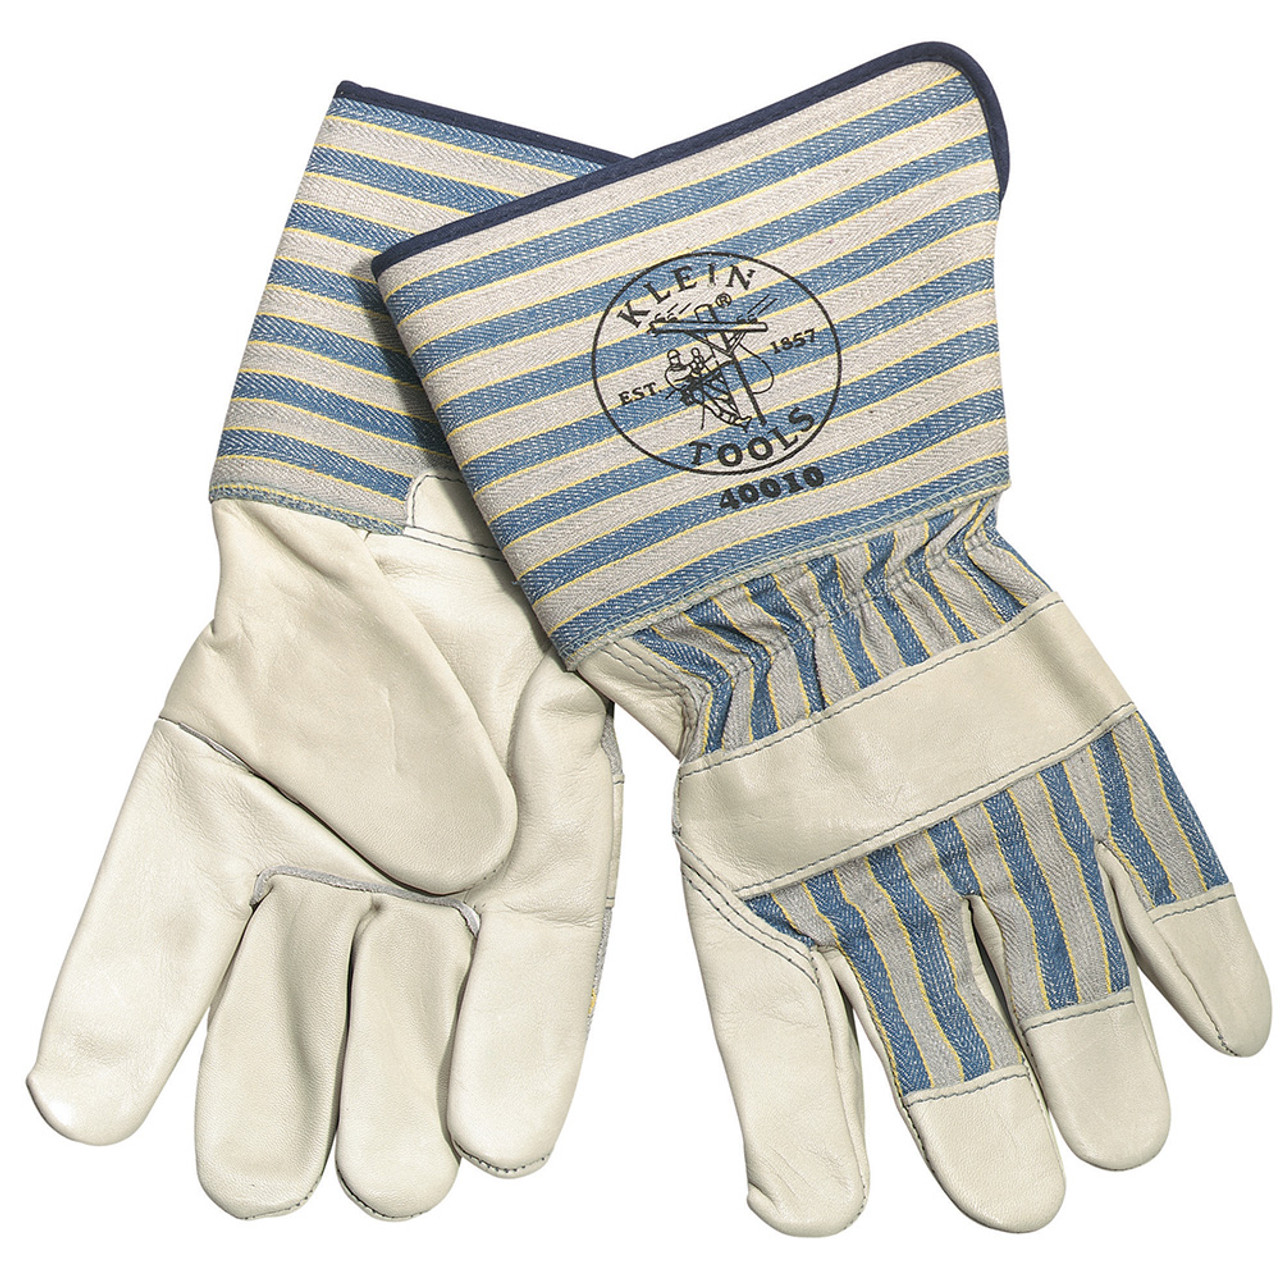 Klein 40010 Large Long-Cuff Gloves Southern Electronics